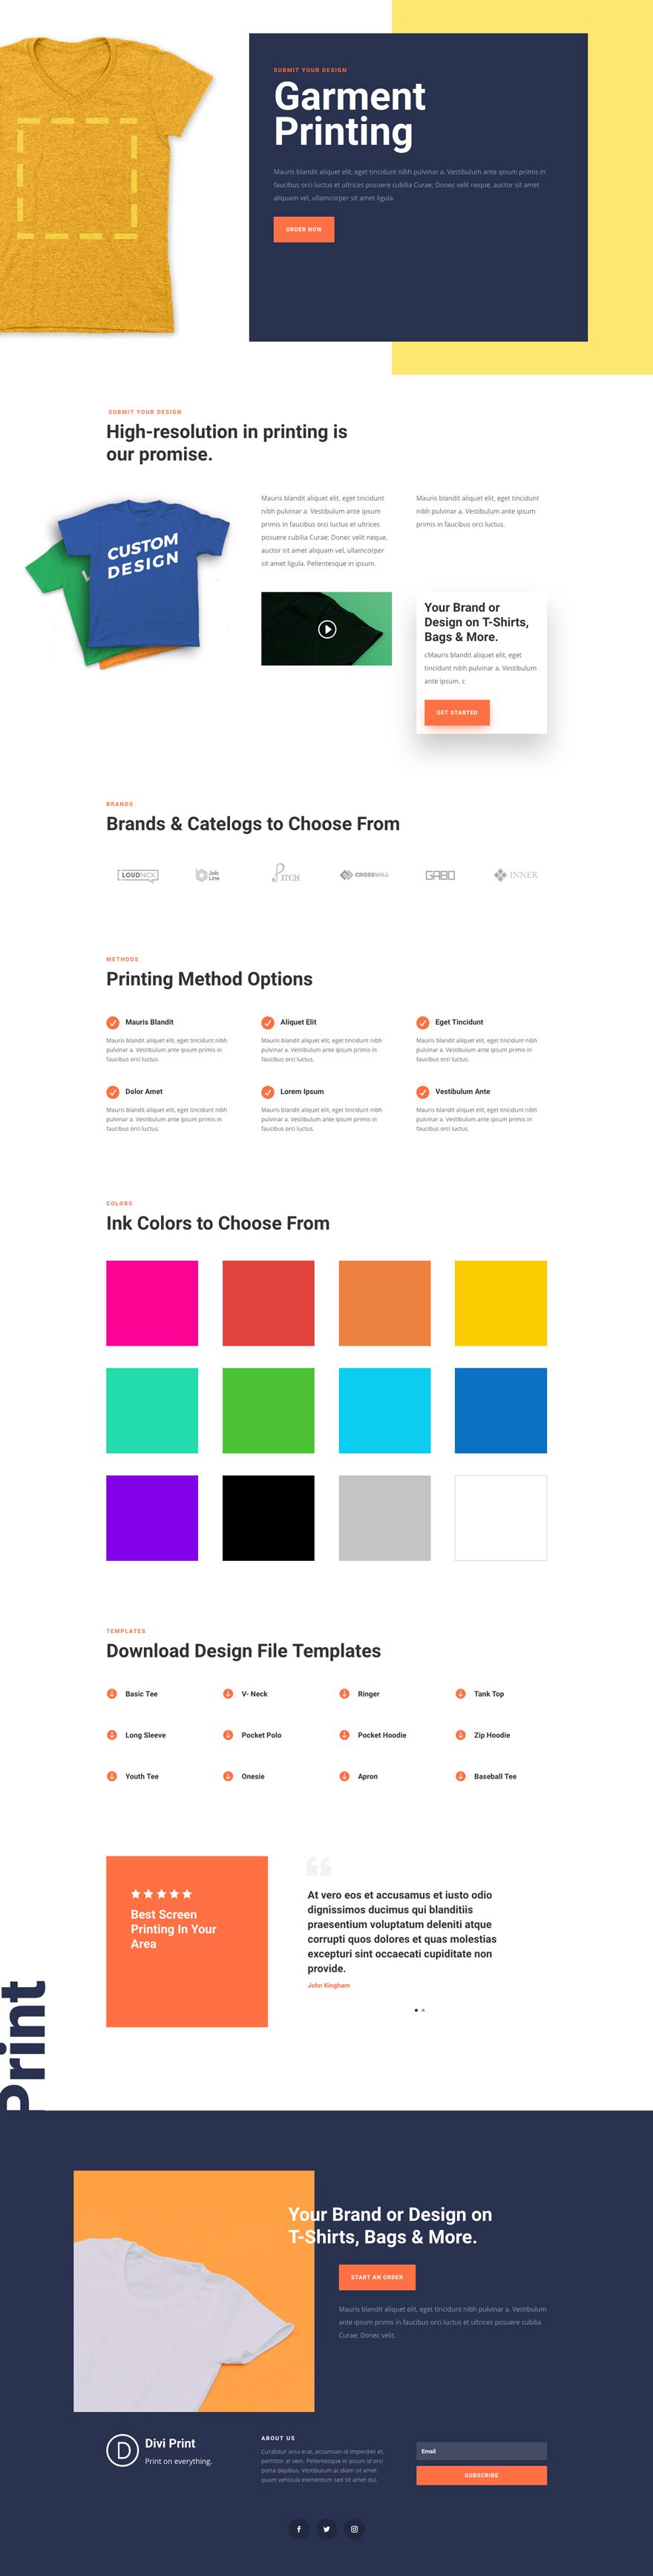 Get A Free Screen Printing Layout Pack For Divi Elegant Themes Blog